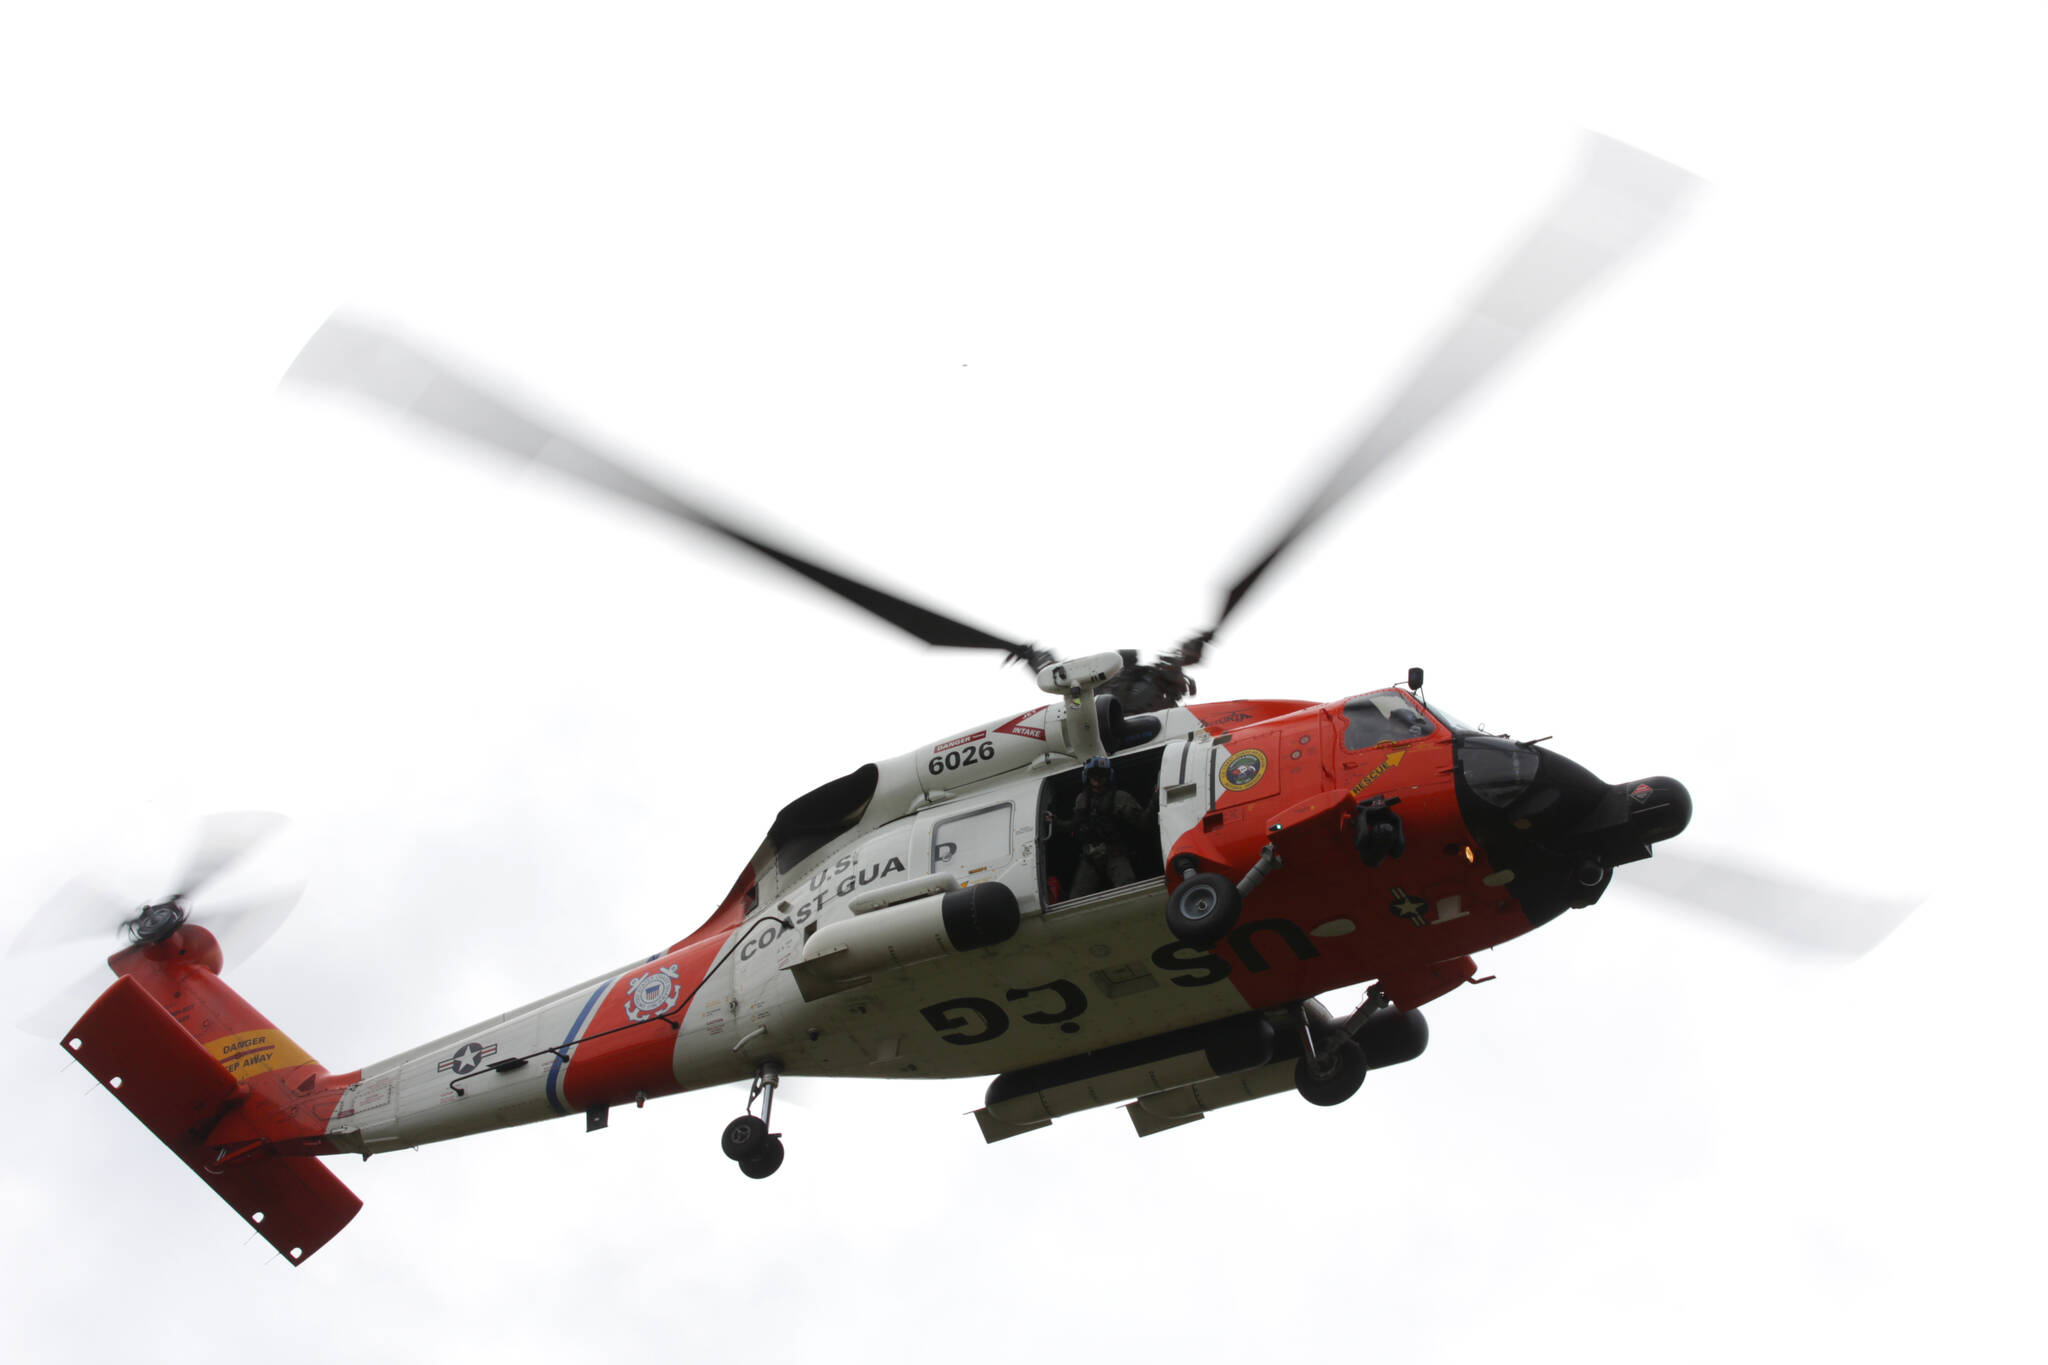 An MH-60 Jayhawk from Coast Guard Air Station Astoria that visited Aberdeen as part of a Veterans Day ceremony makes its approach on Nov. 10. (Michael S. Lockett / The Daily World)